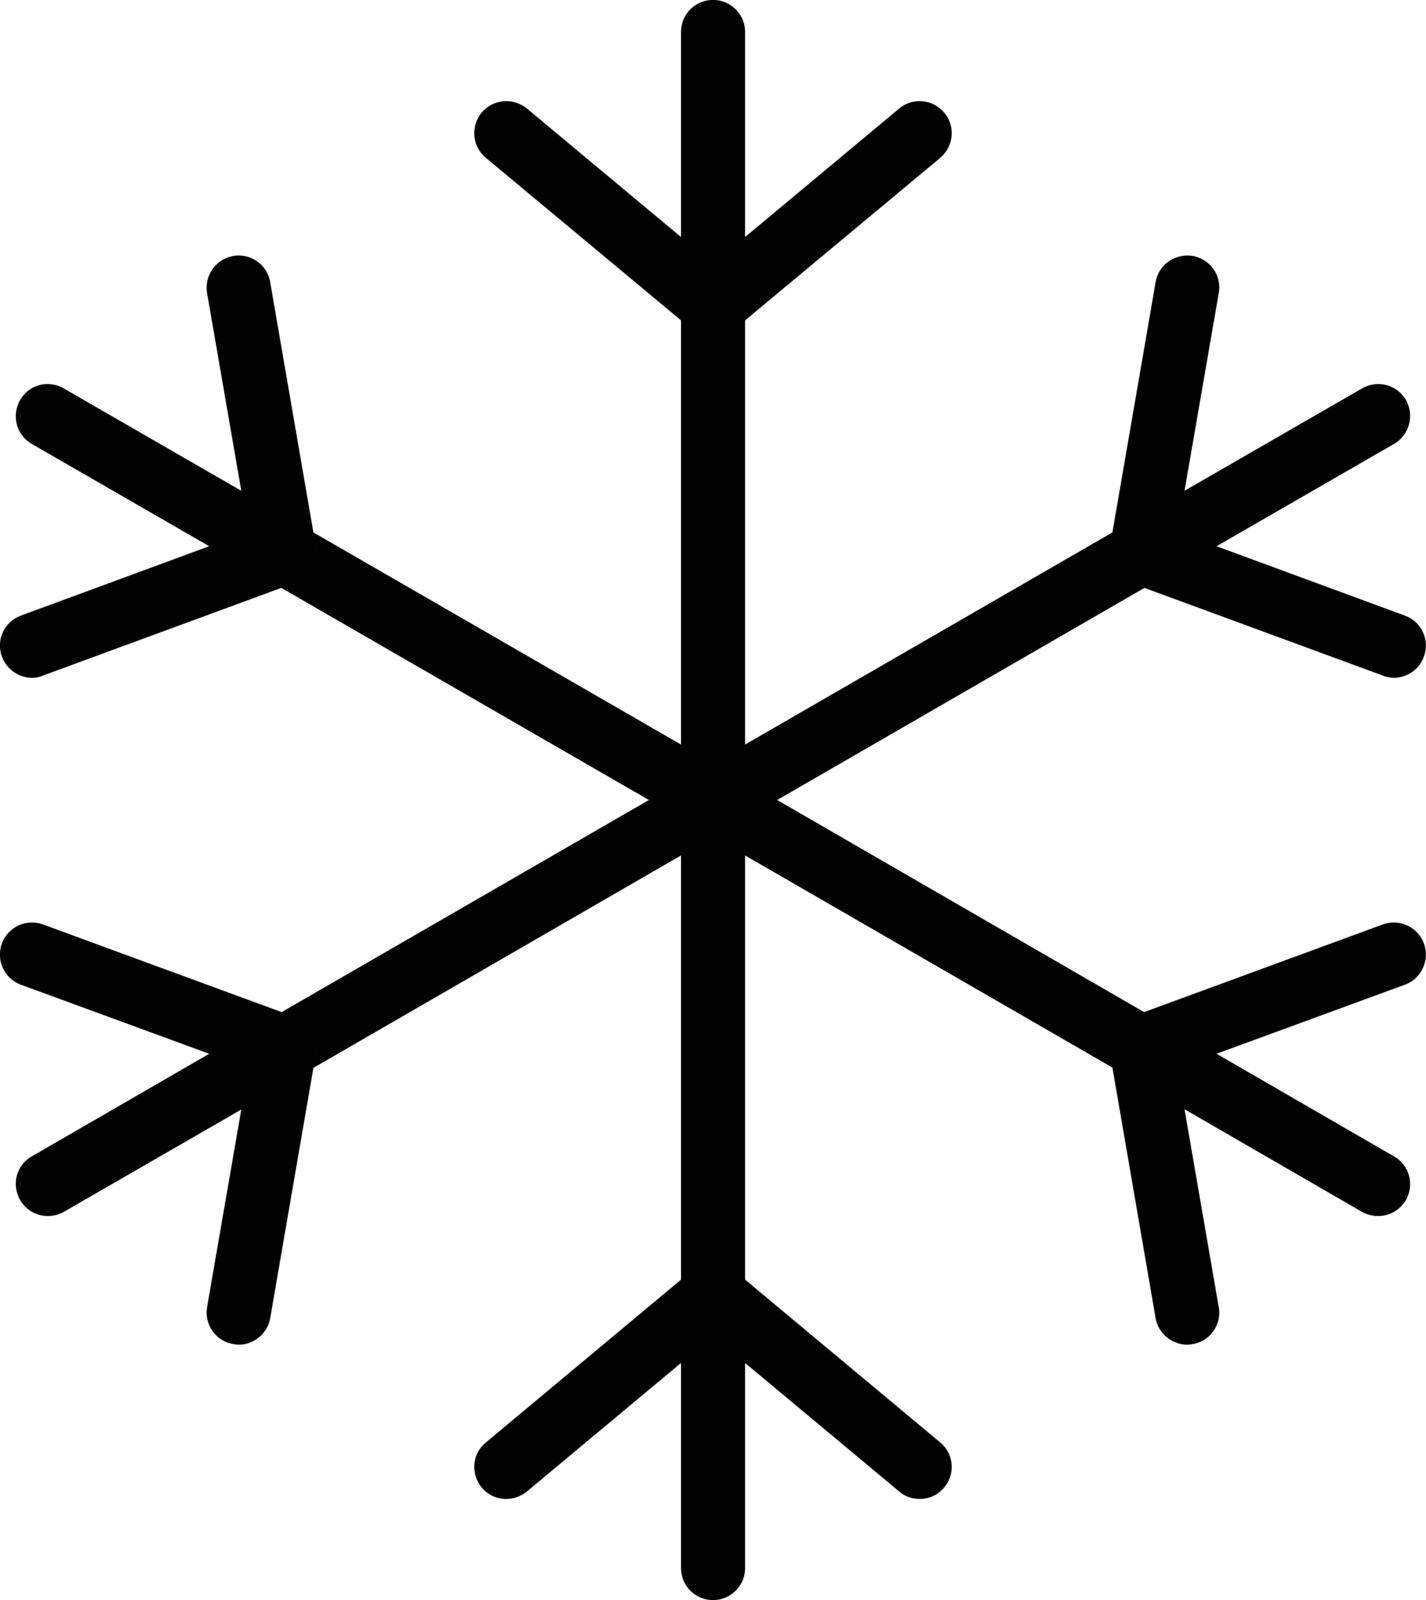 snowflake Vector illustration on a transparent background. Premium quality symbols. Gyliph vector icon for concept and graphic design.